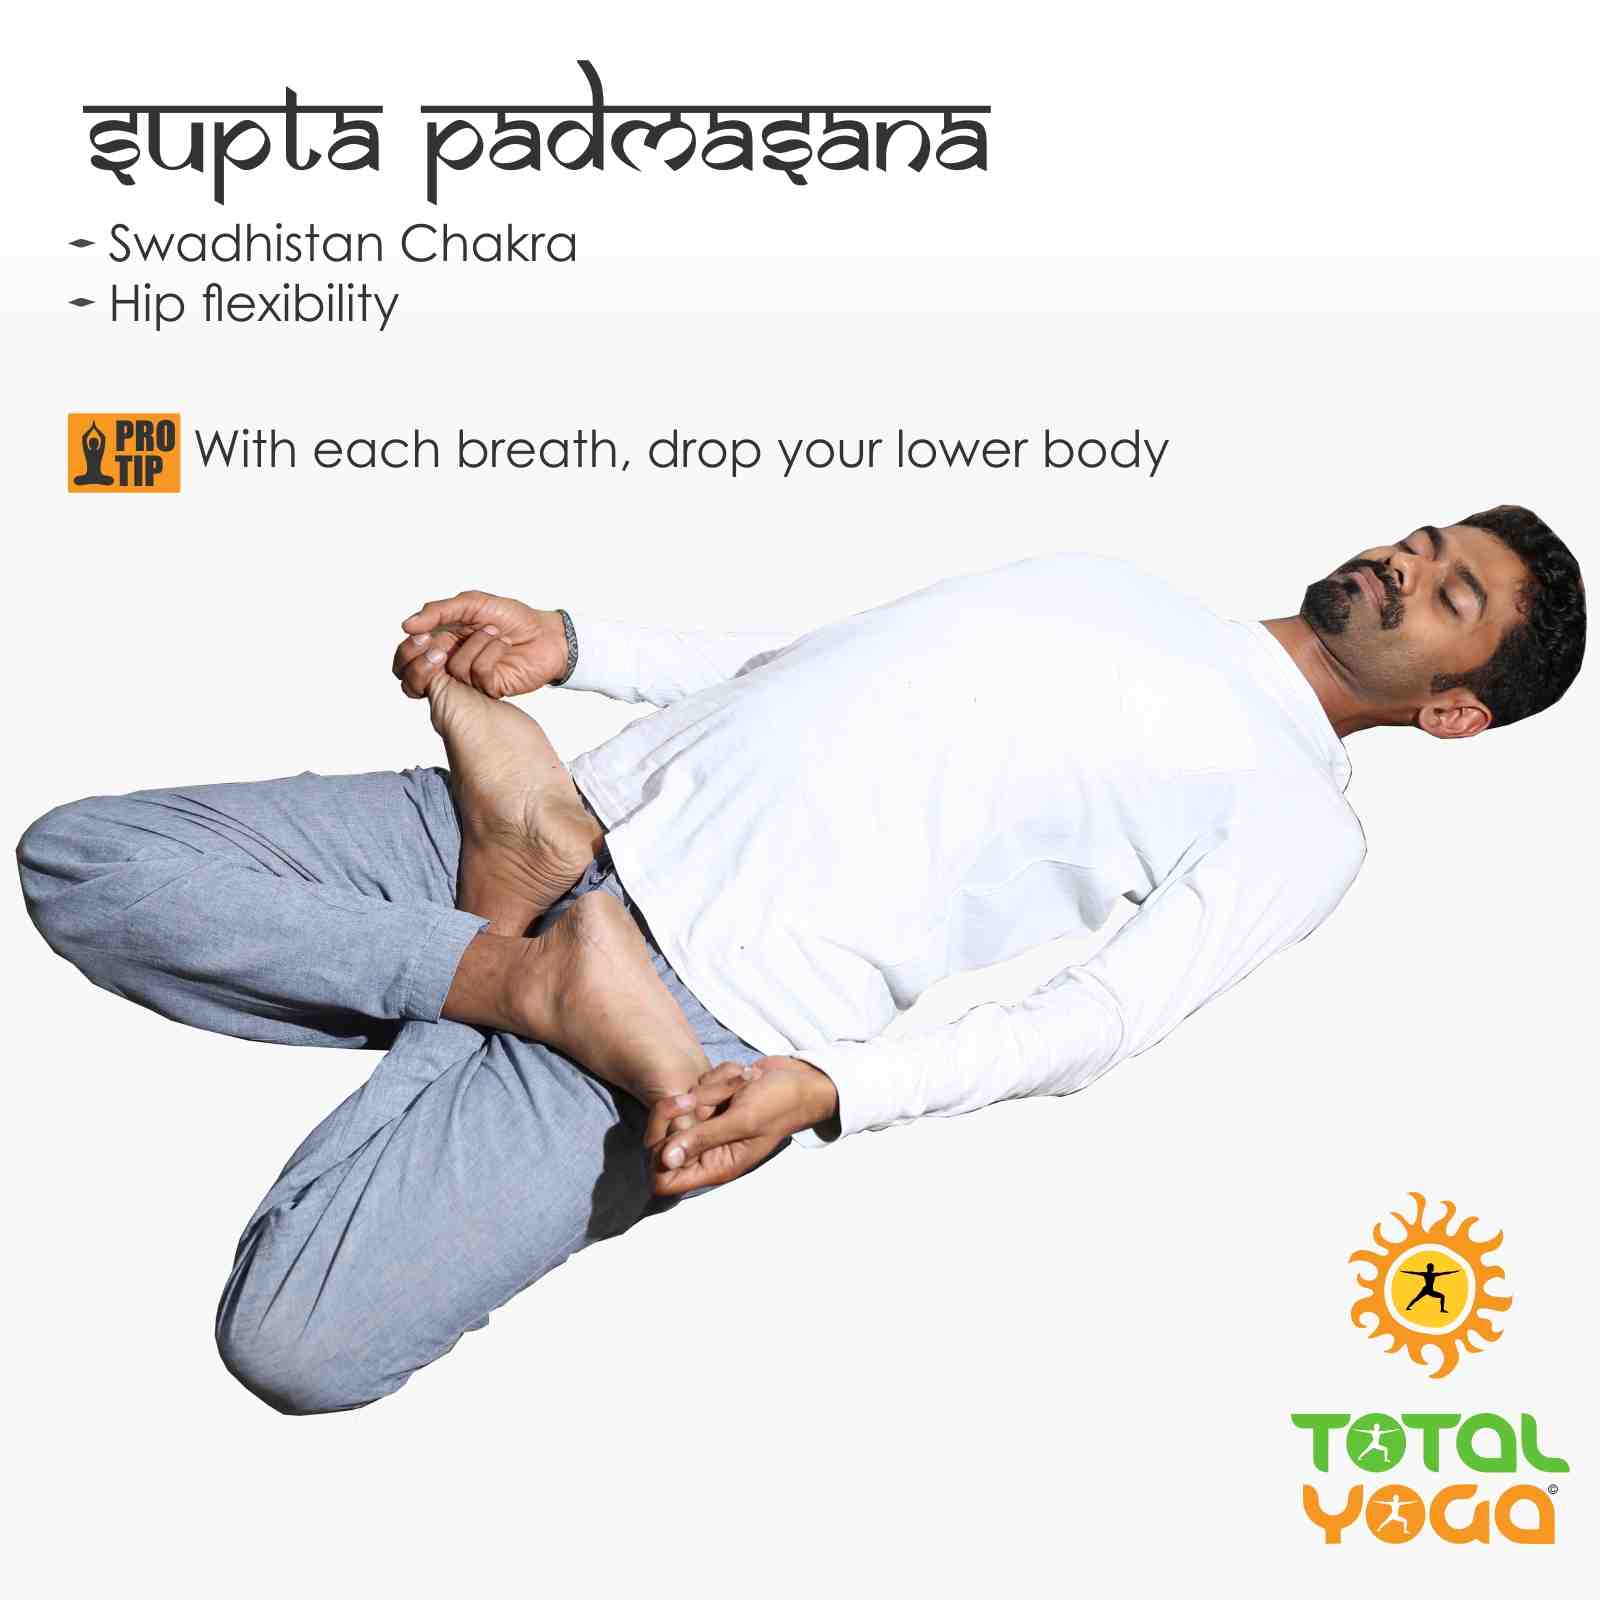 Which asana has to be done for relaxation while doing abdomen postures?